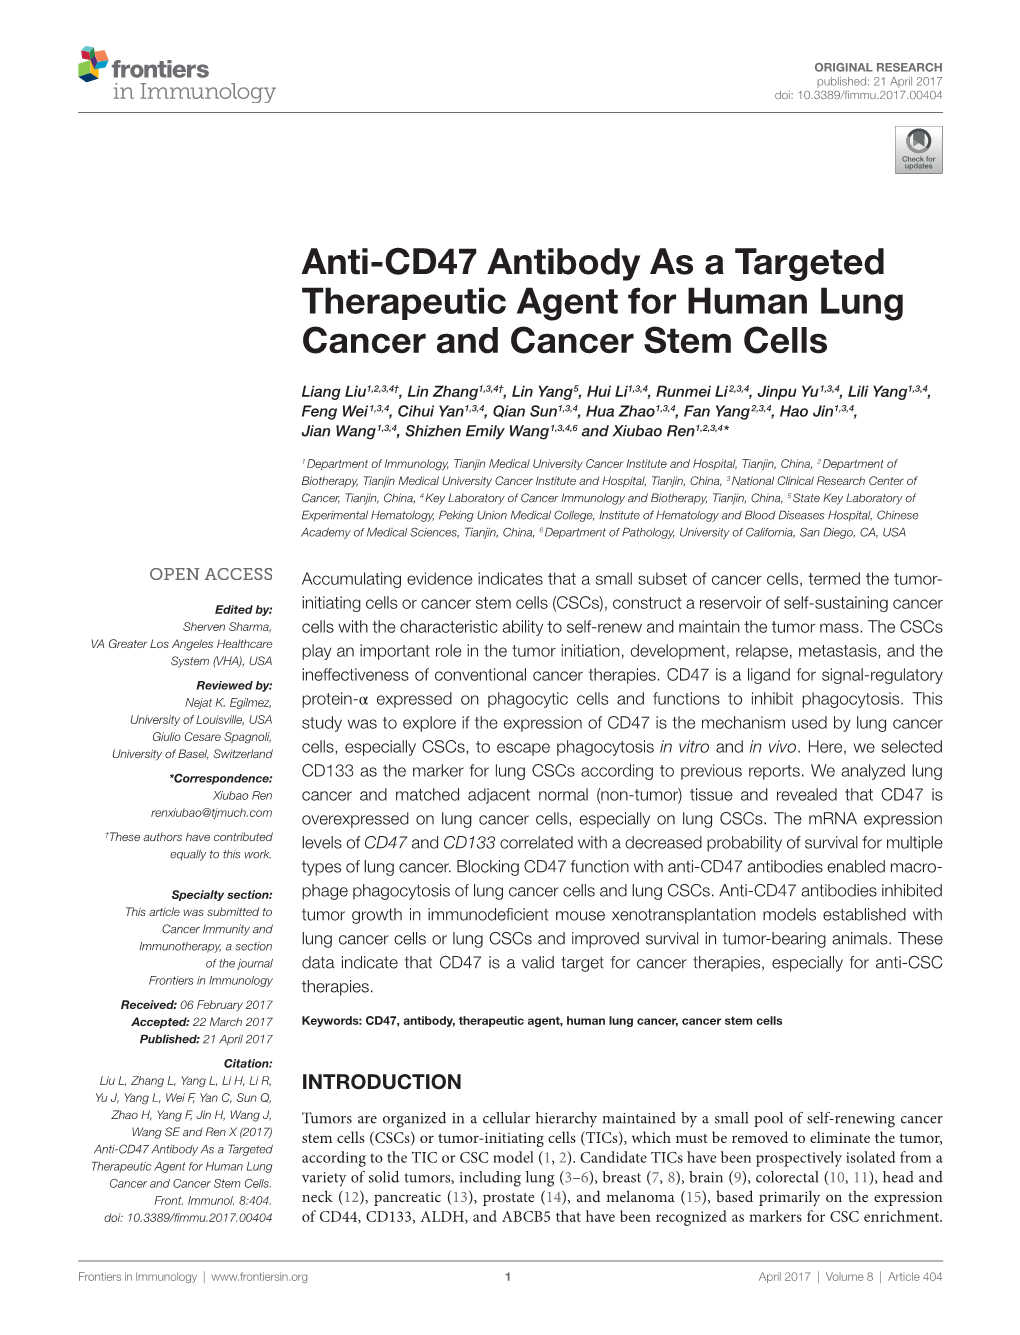 Anti-Cd47 Antibody As a Targeted Therapeutic Agent for Human Lung Cancer and Cancer Stem Cells